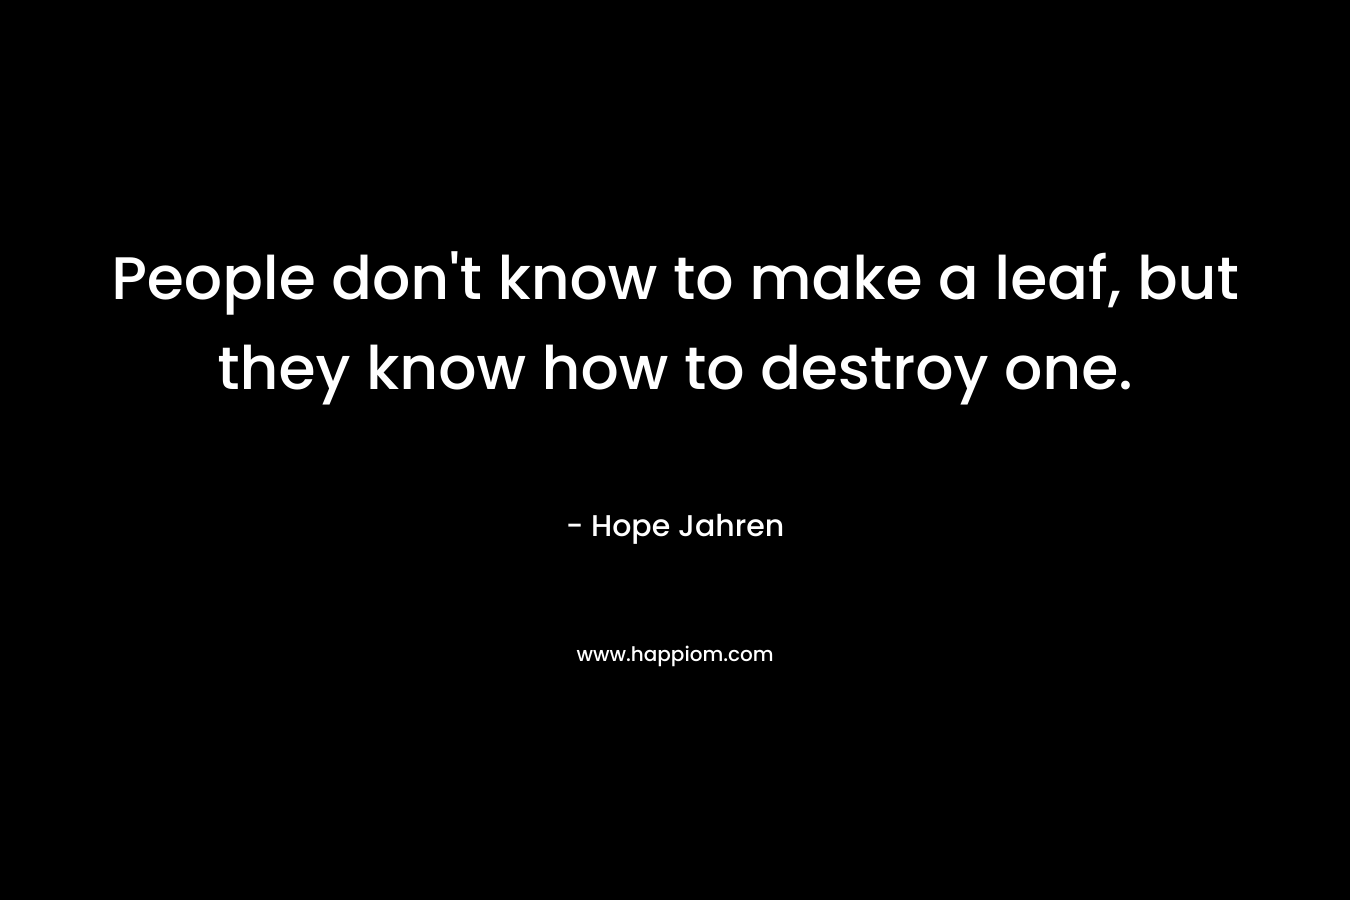 People don't know to make a leaf, but they know how to destroy one.